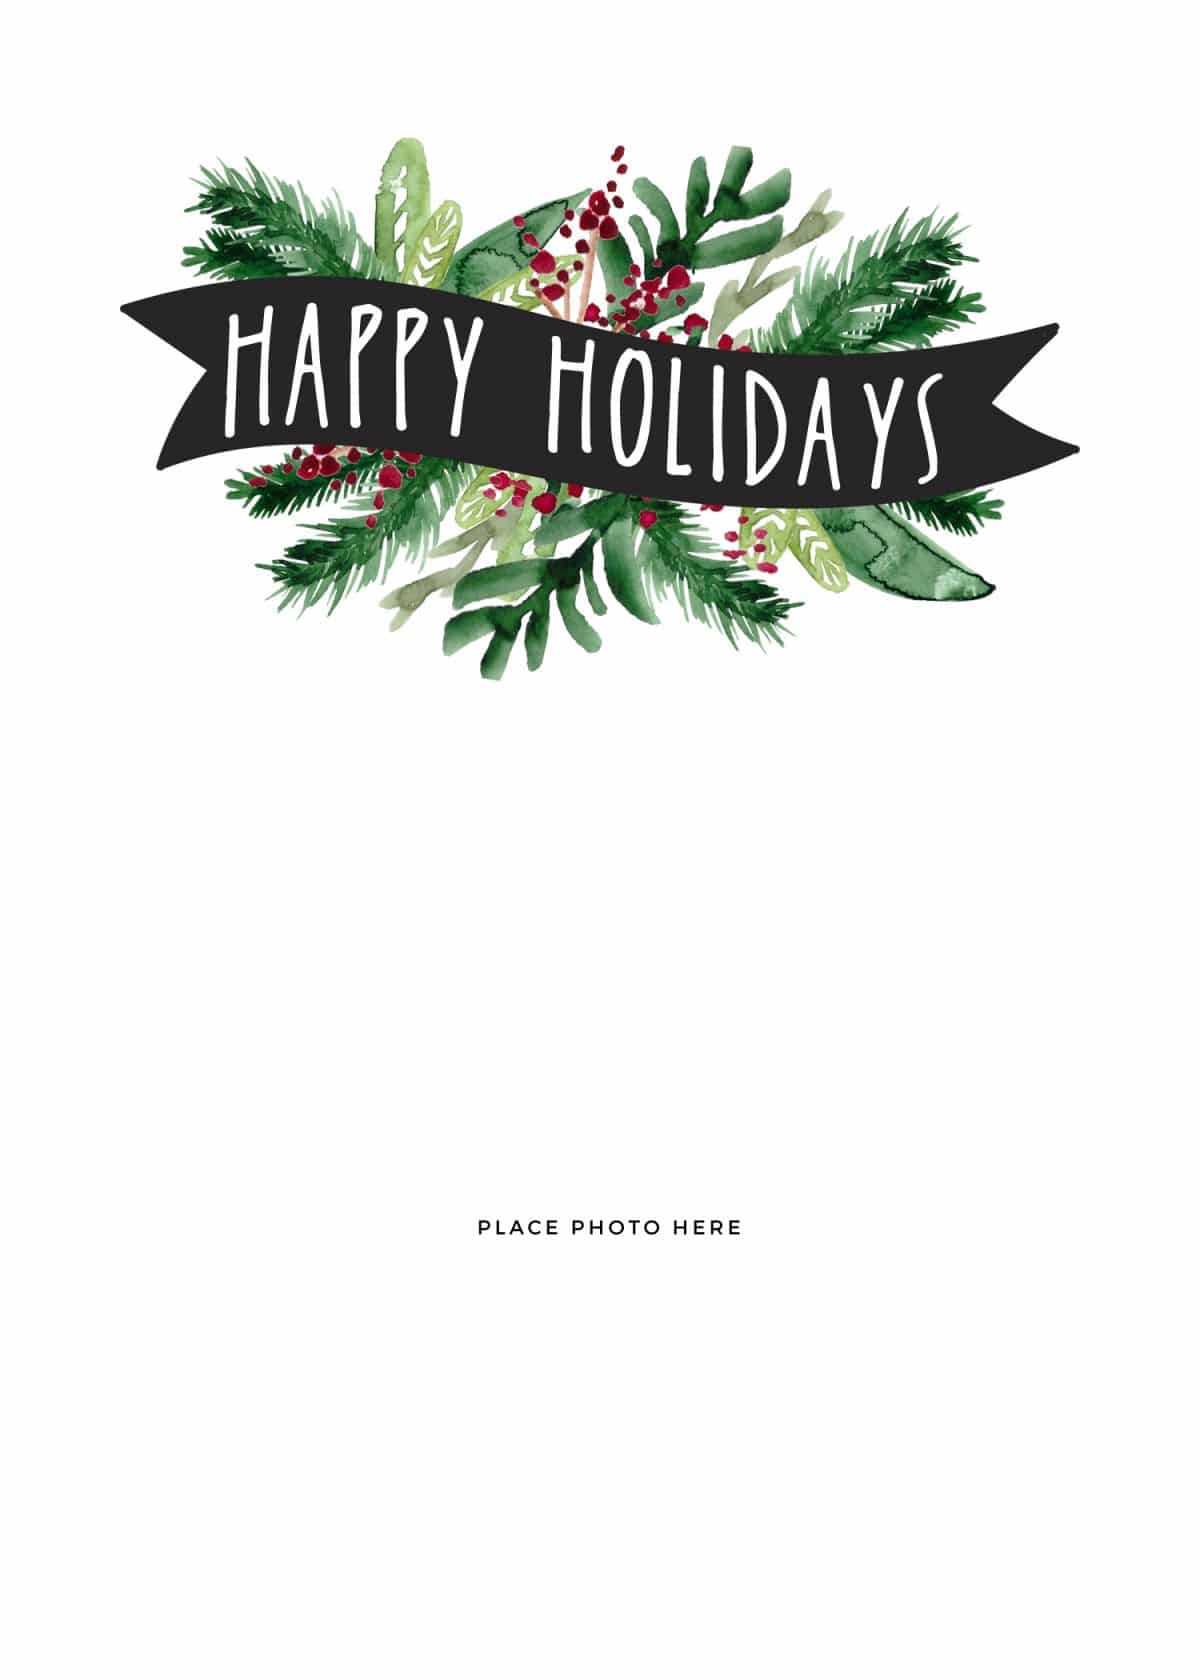 Make Your Own Photo Christmas Cards (For Free!) – Somewhat In Happy Holidays Card Template